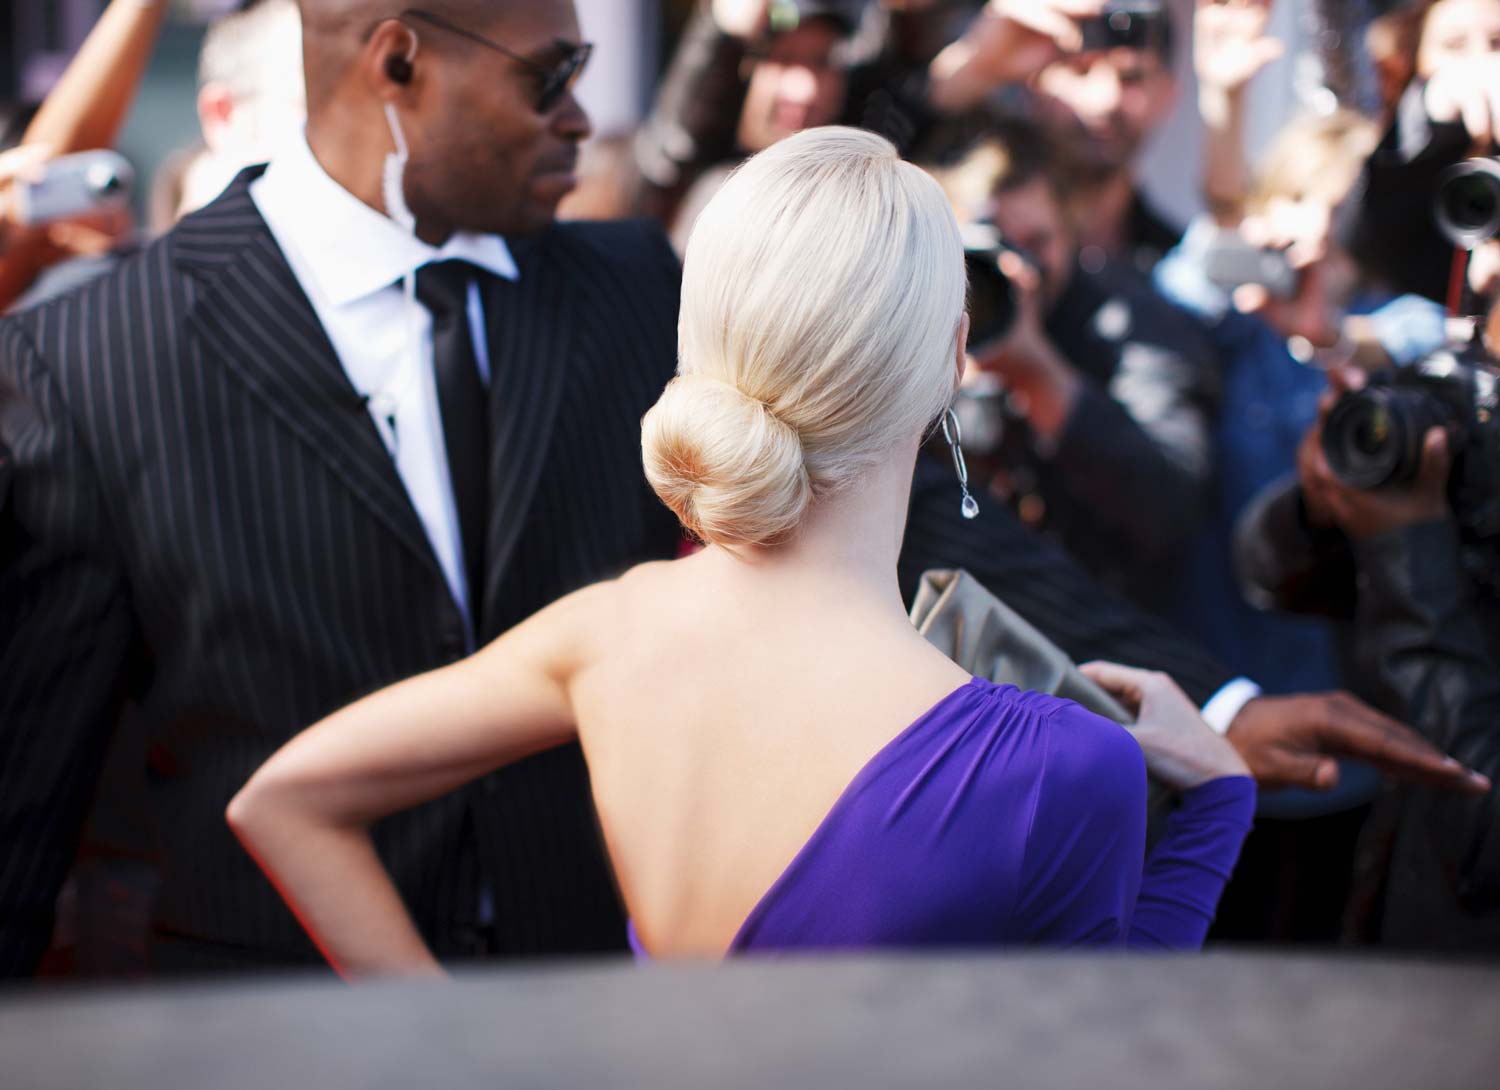 A celebrity in a purple dress at a red carpet event with a personal bodyguard.